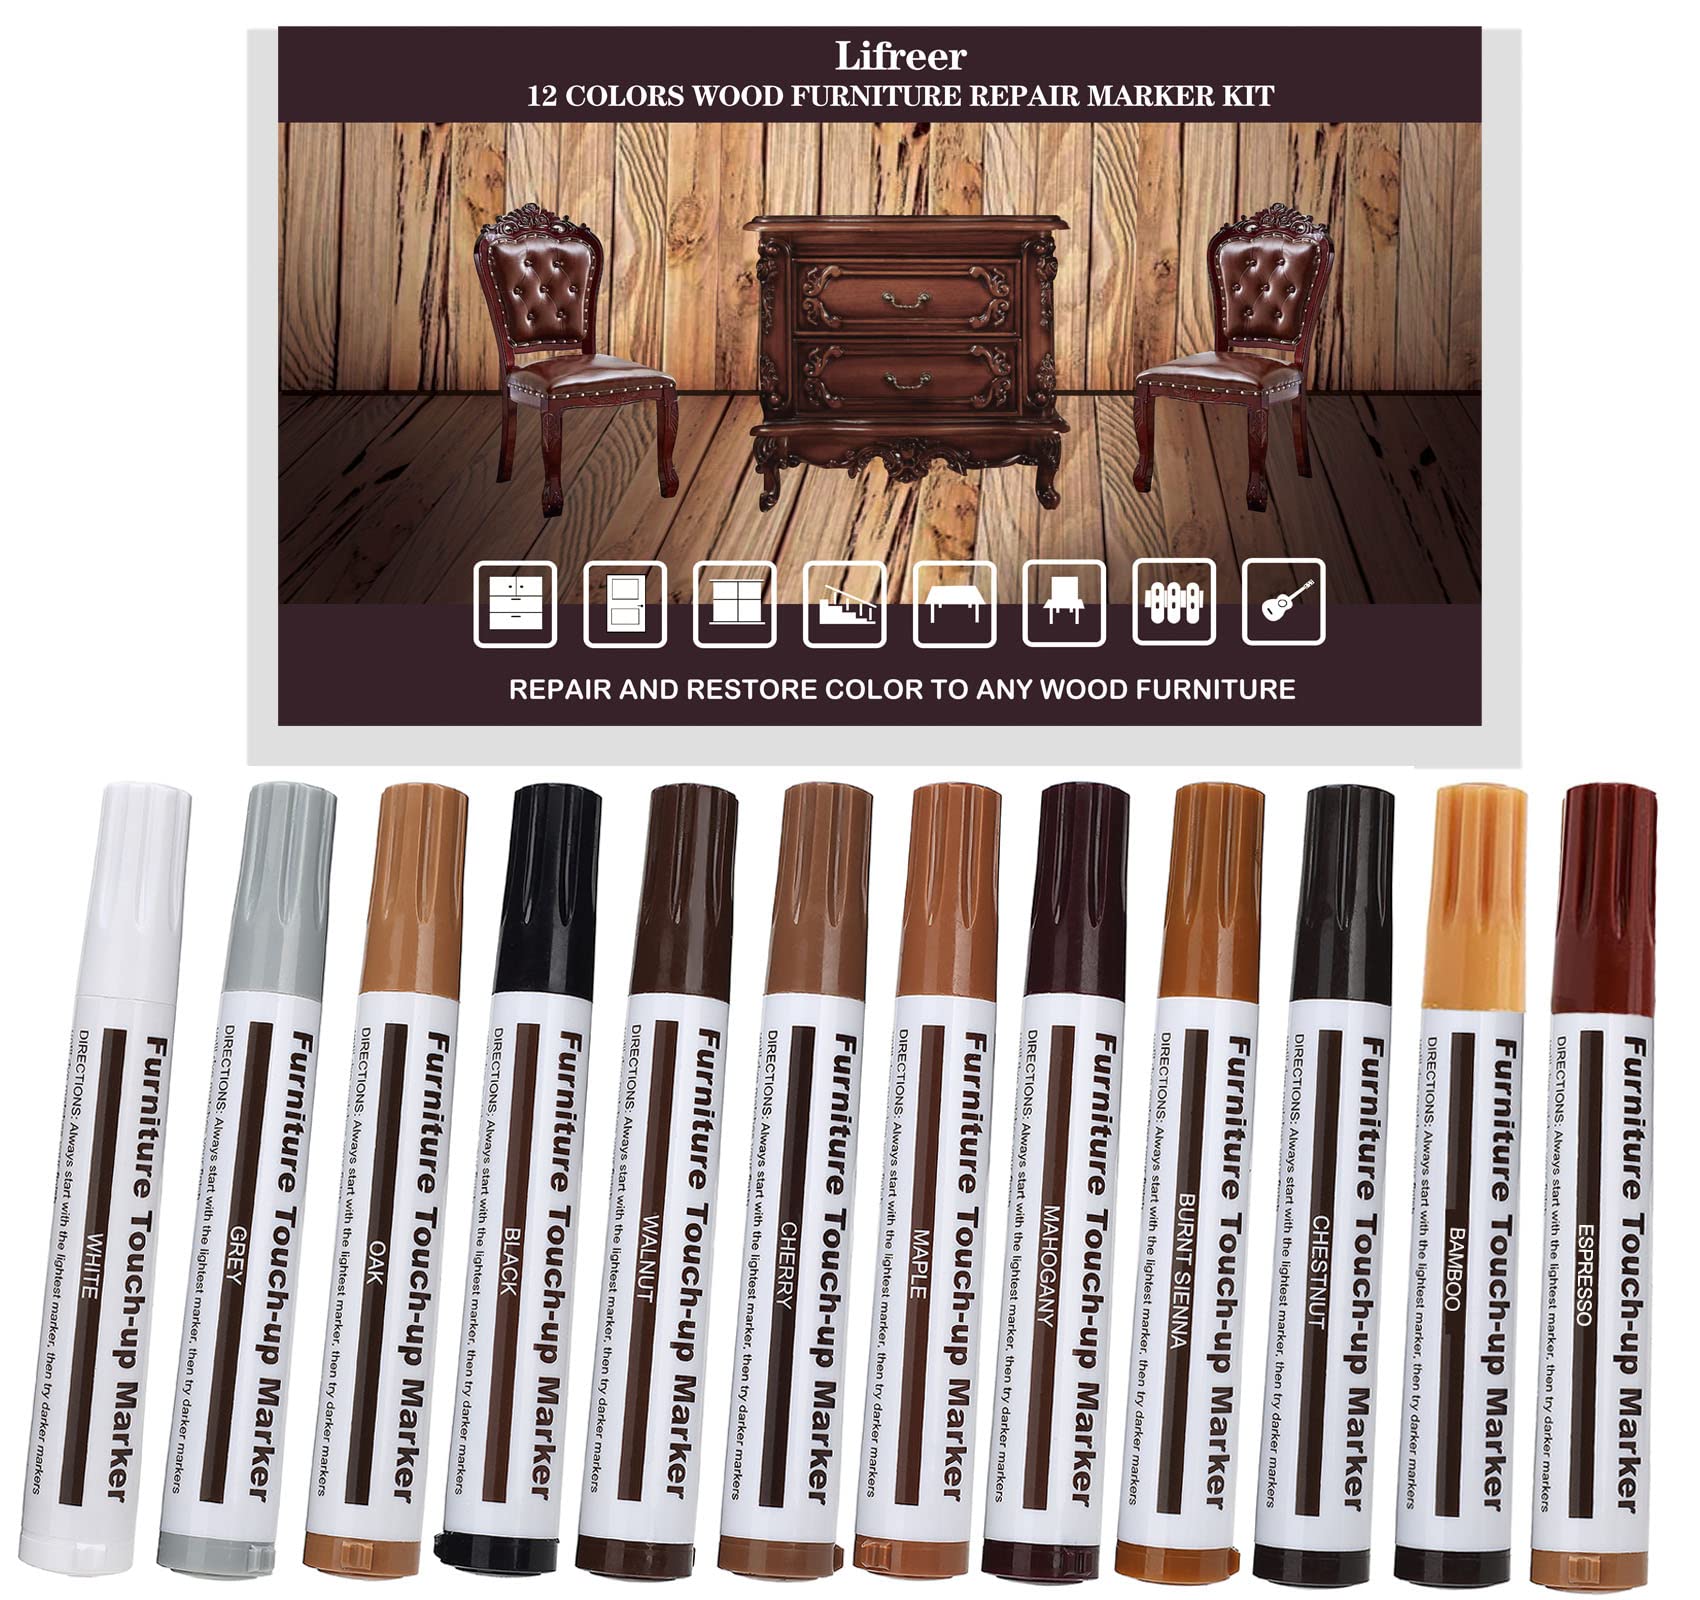 Lifreer Revolutionary Furniture Touch Up Markers, 12 Colors Wood Scratch  Repair Markers Kit - Perfect for Stains, Scratches, Wood Floors, Tables,  and Bedposts - Easy to Use and Long-Lasting Results!